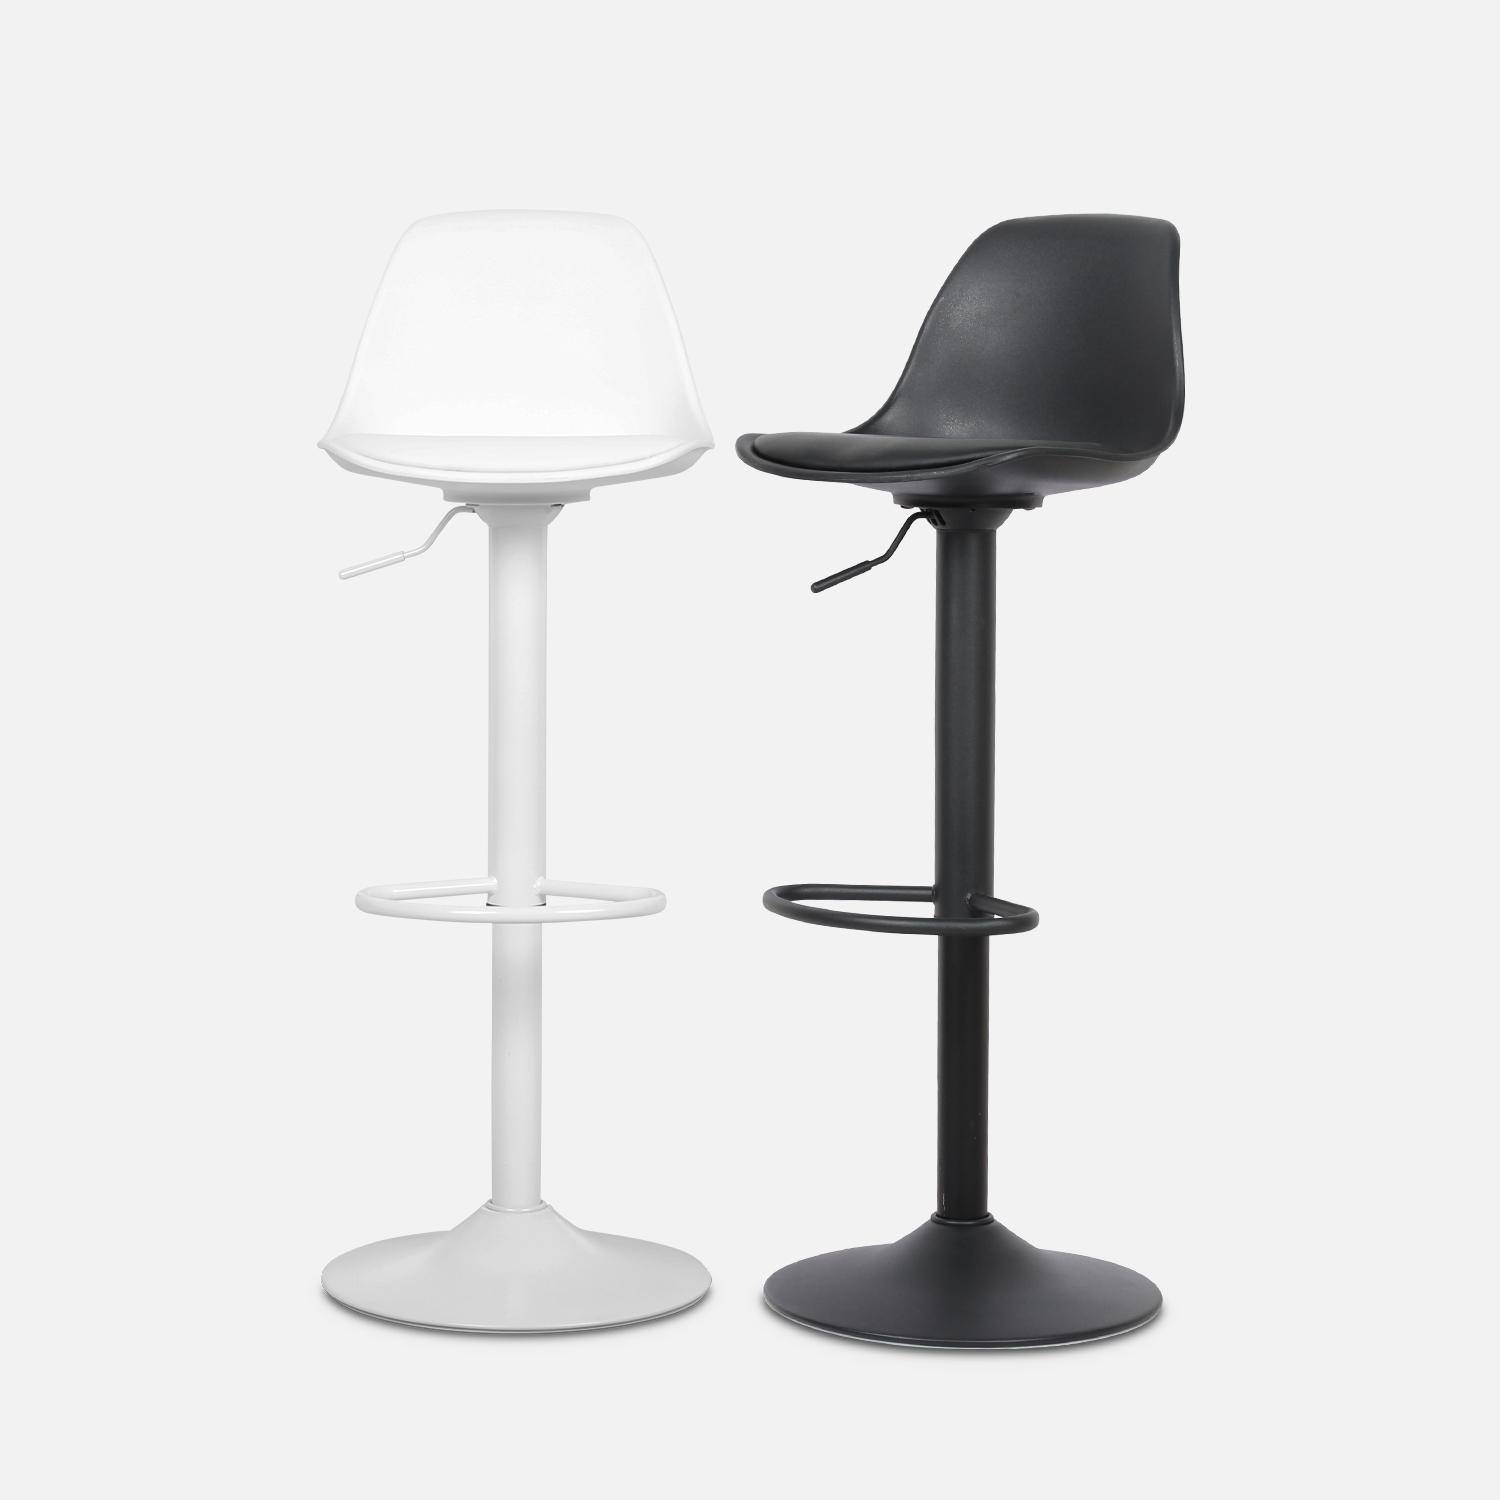 Pair of faux leather, rounded backrest, adjustable bar stools, seat height 61.5 - 83.5cm - Noah - Black Photo8